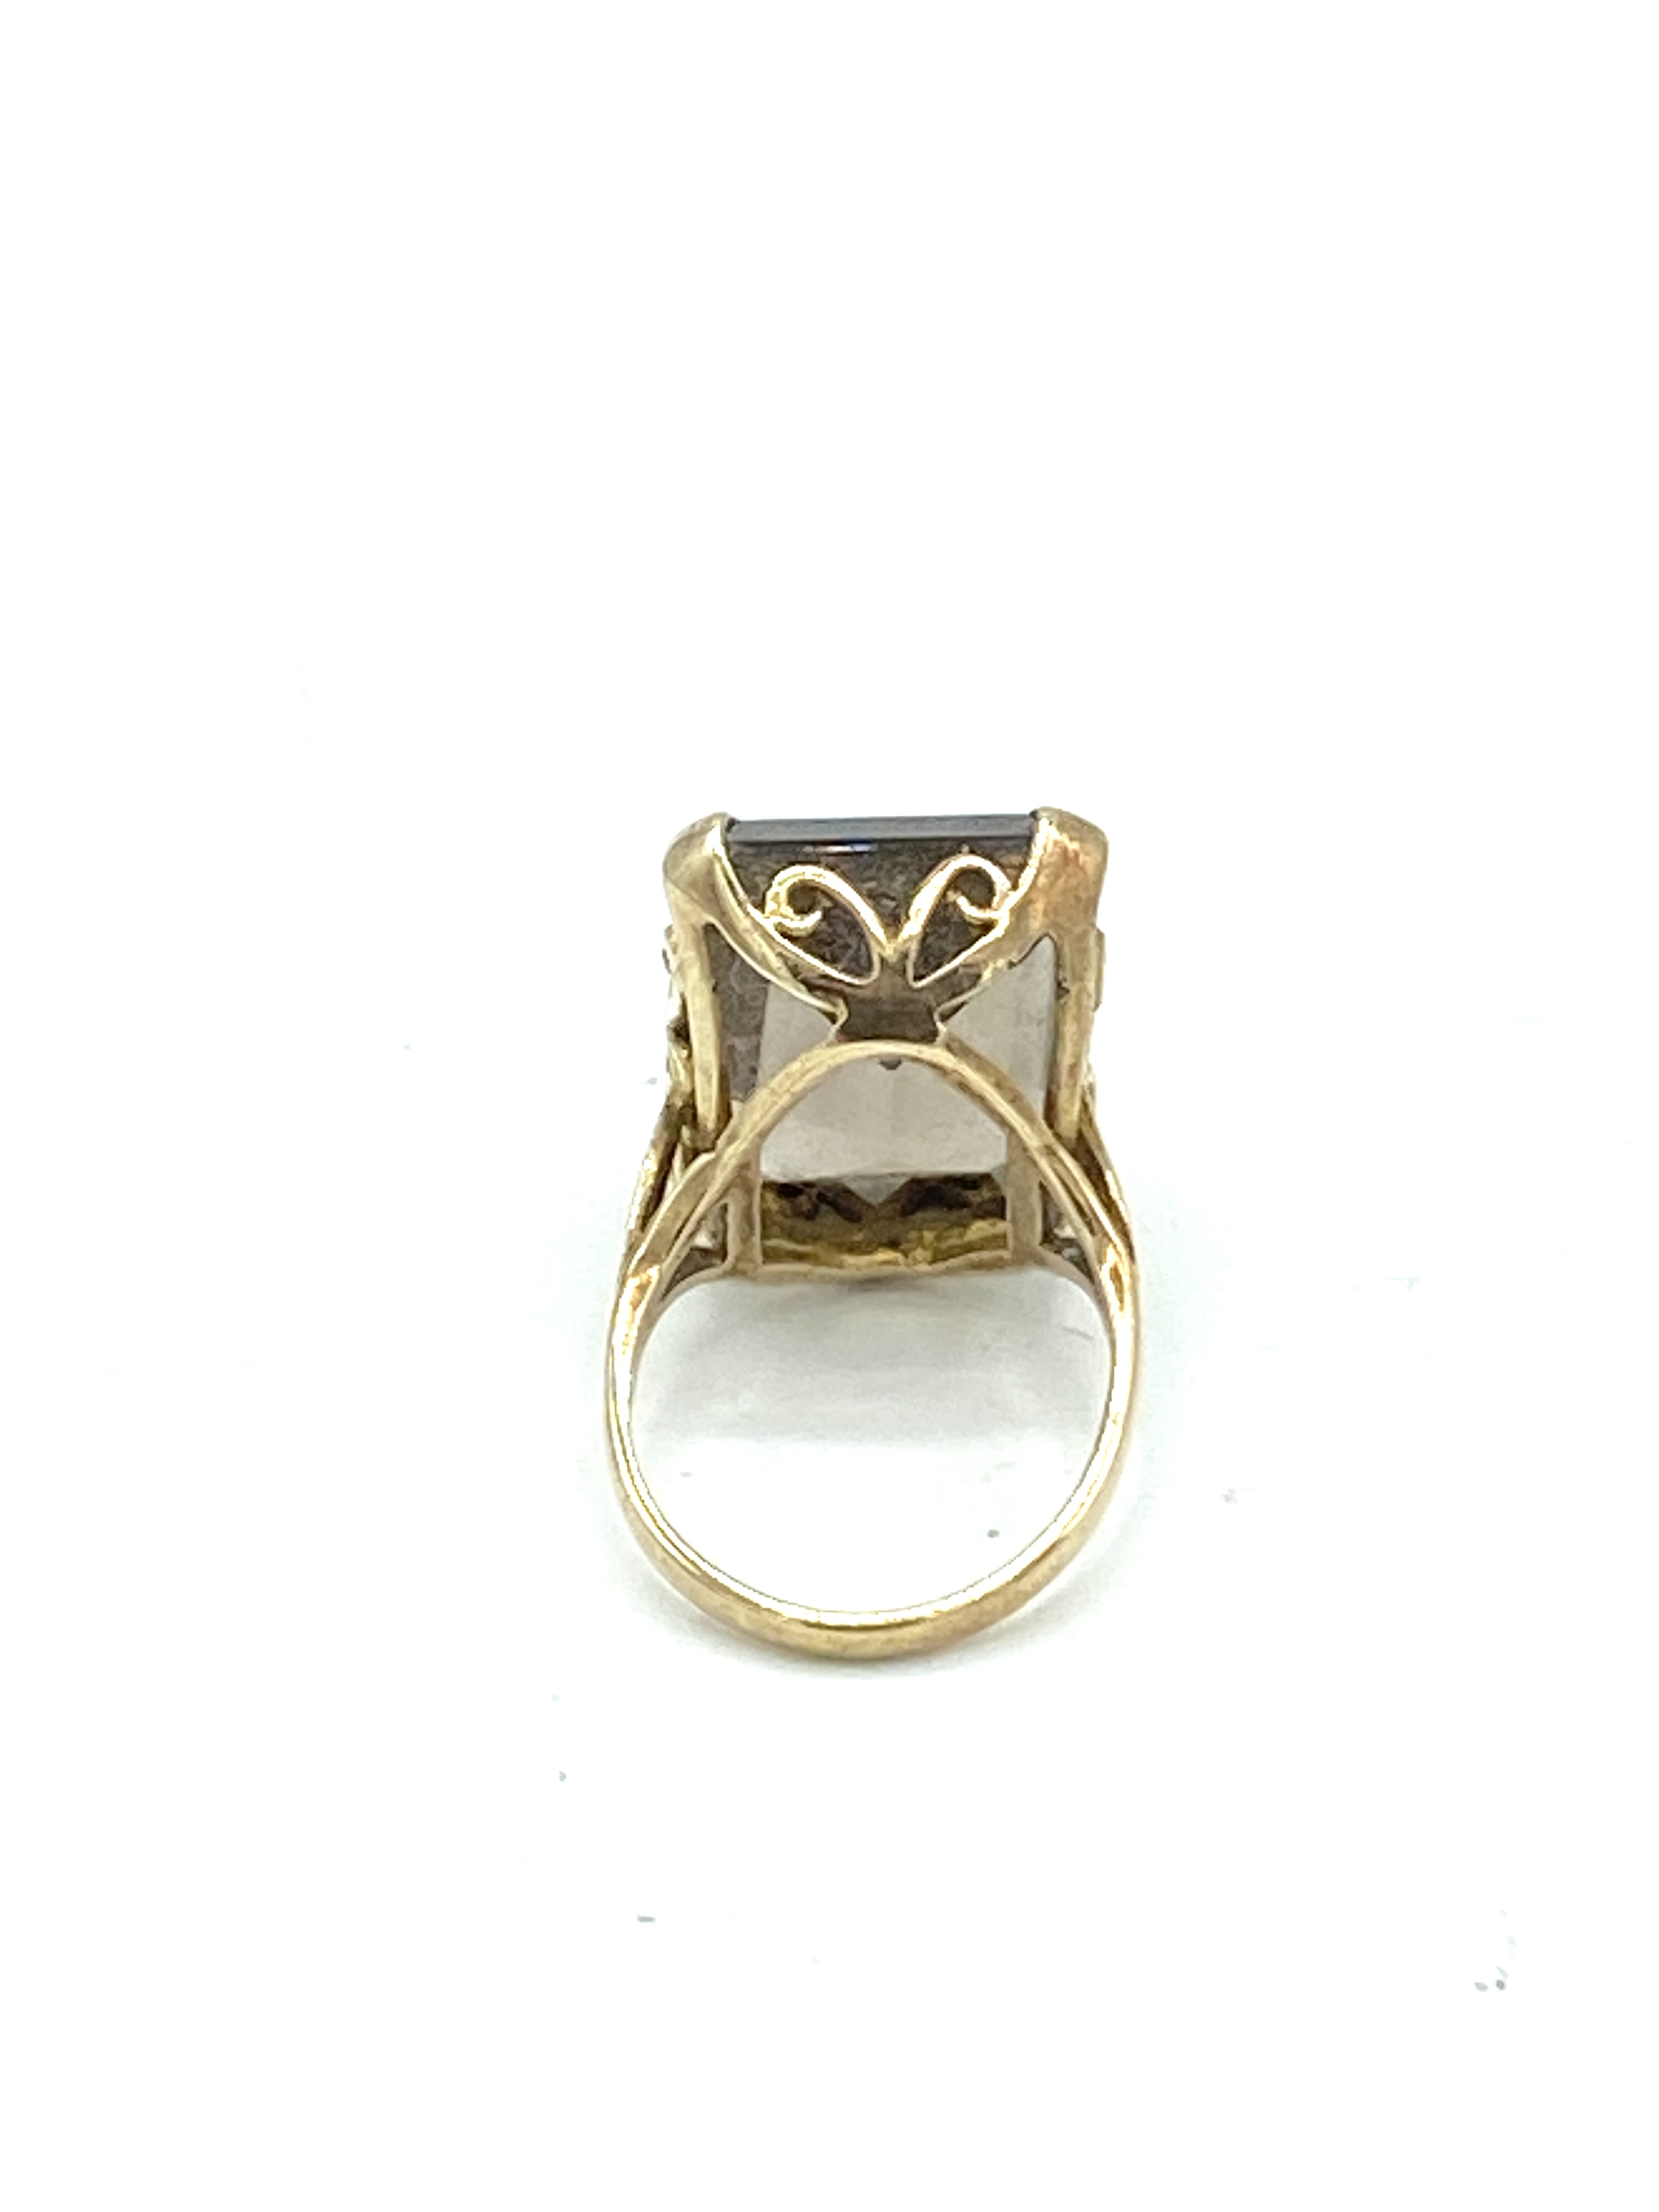 9ct gold ring with brown stone mount - Image 3 of 3